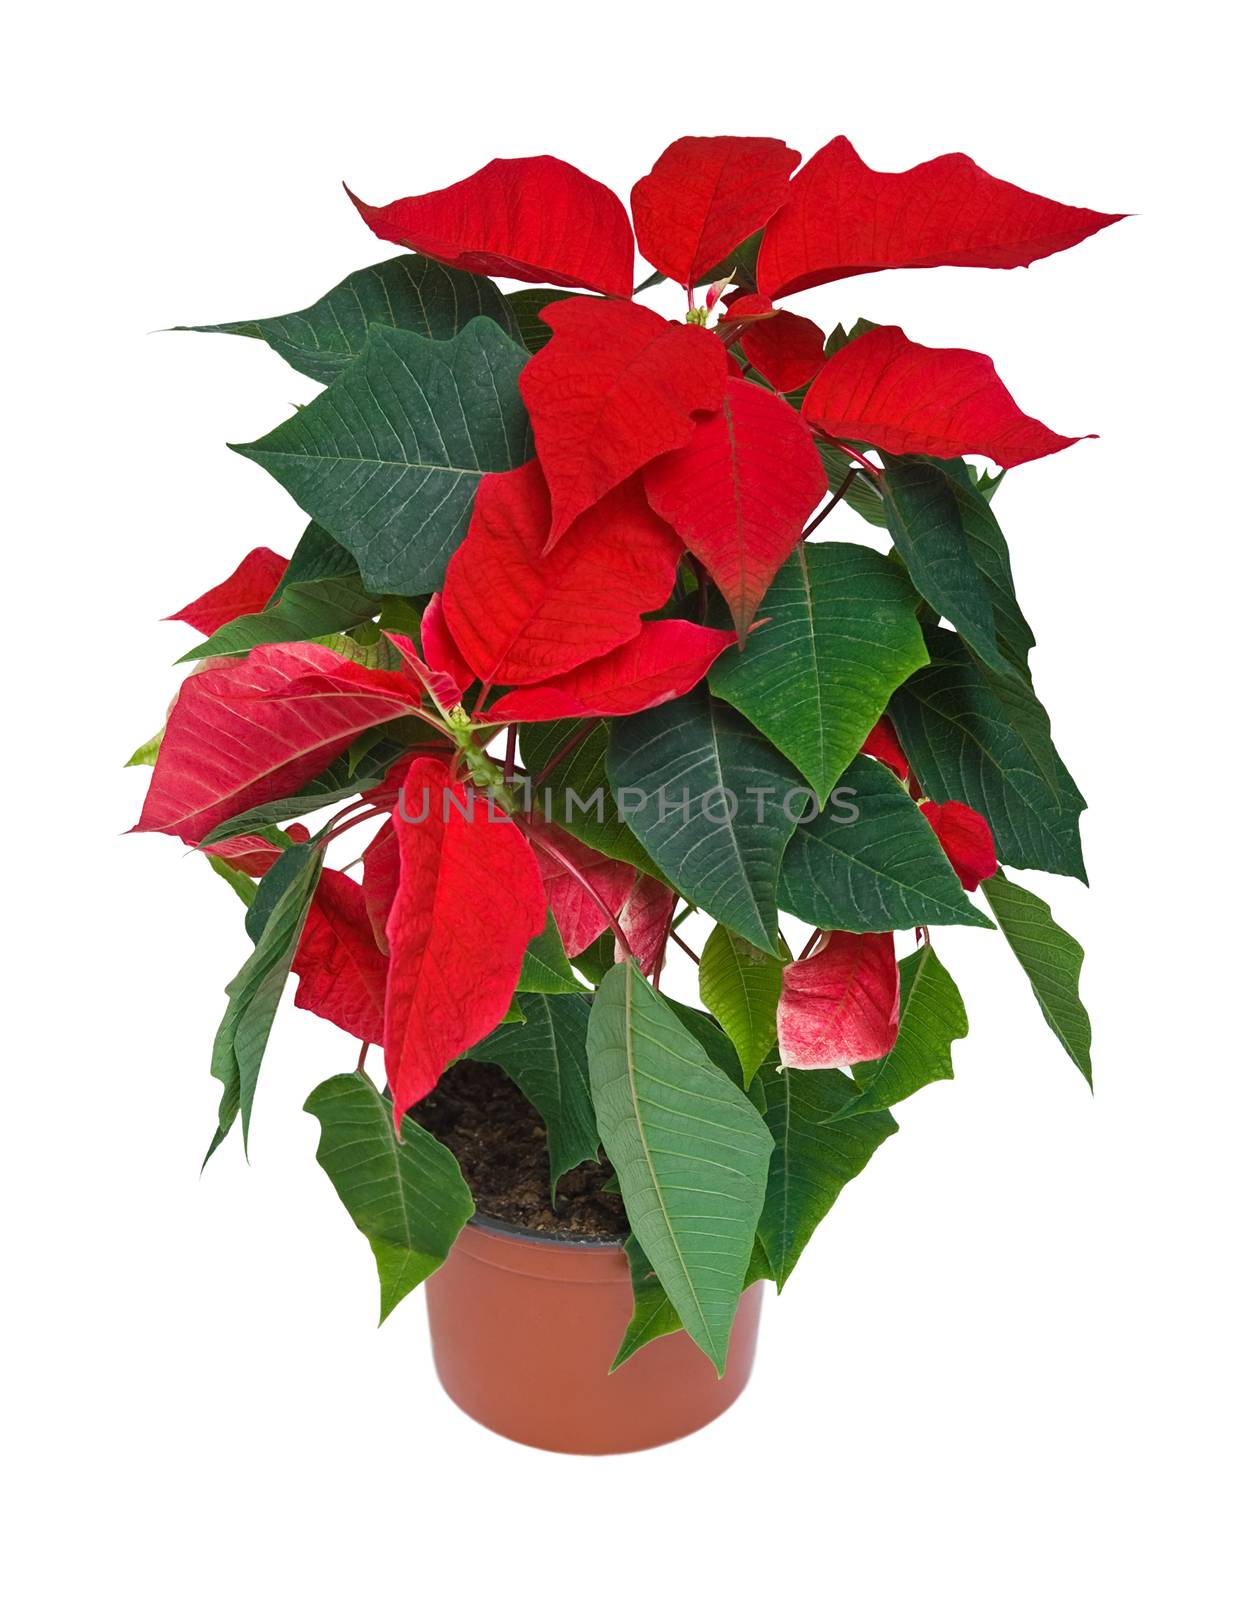 Poinsettia potted cutout by vkstudio